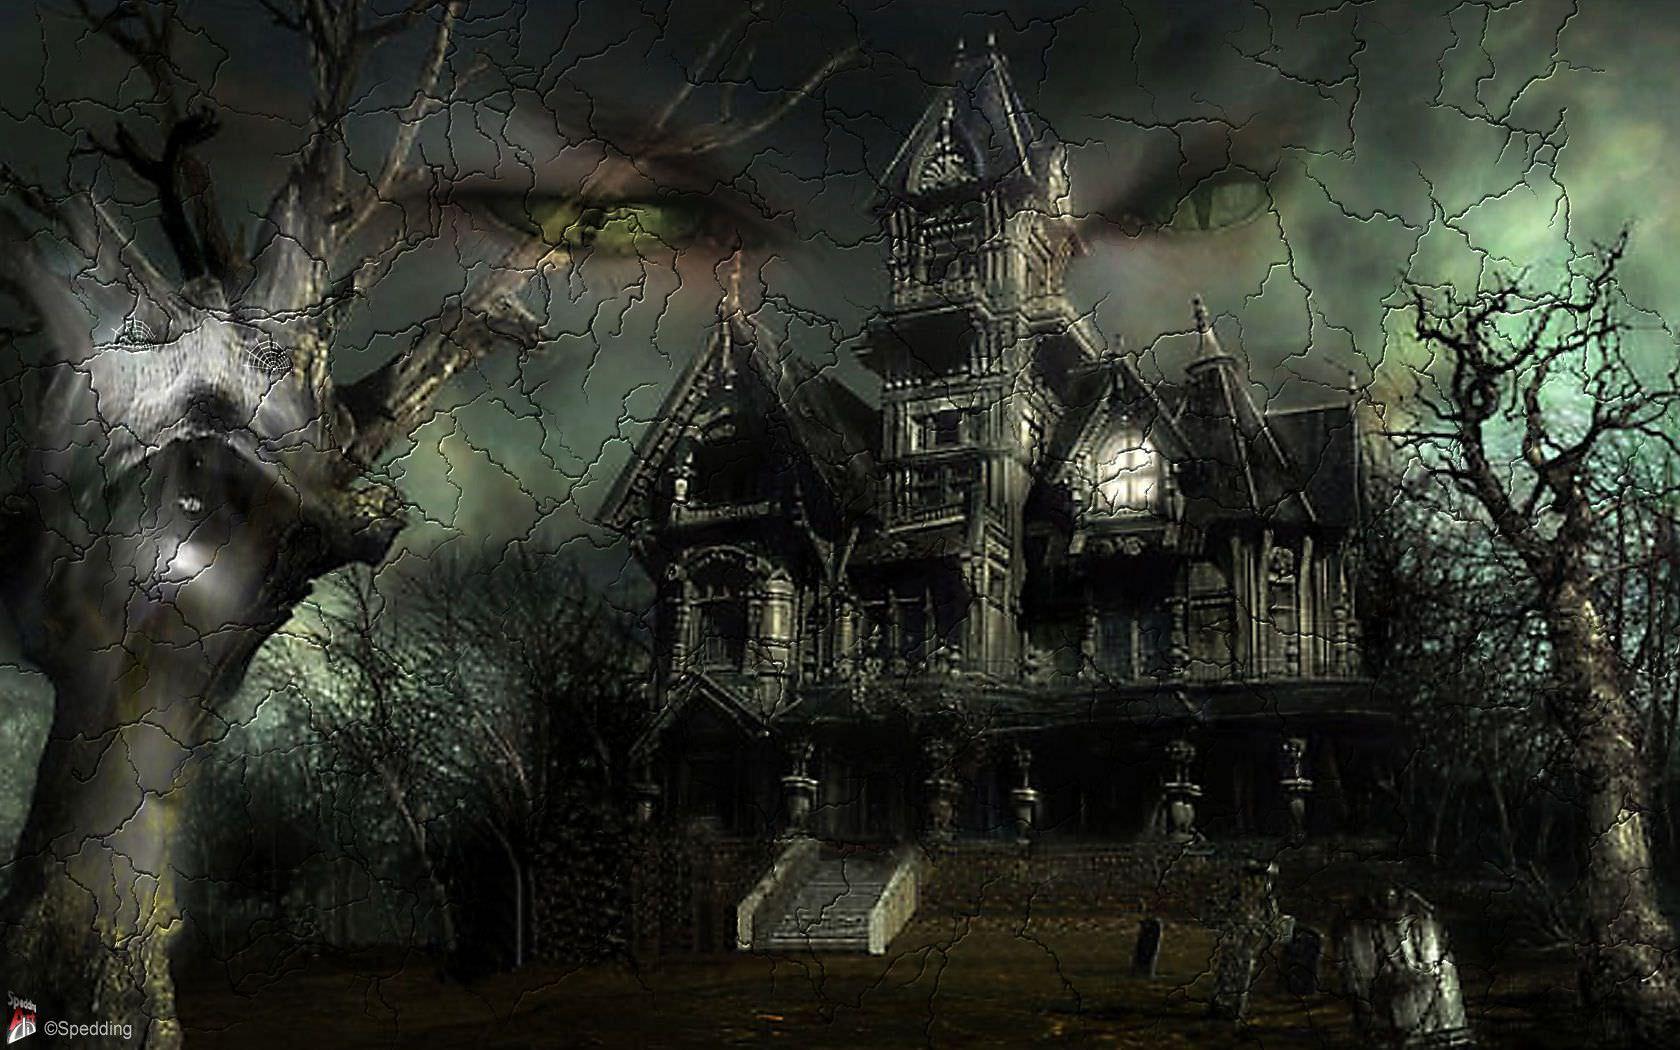 Scary Background, Wallpaper, Image, Picture. Design